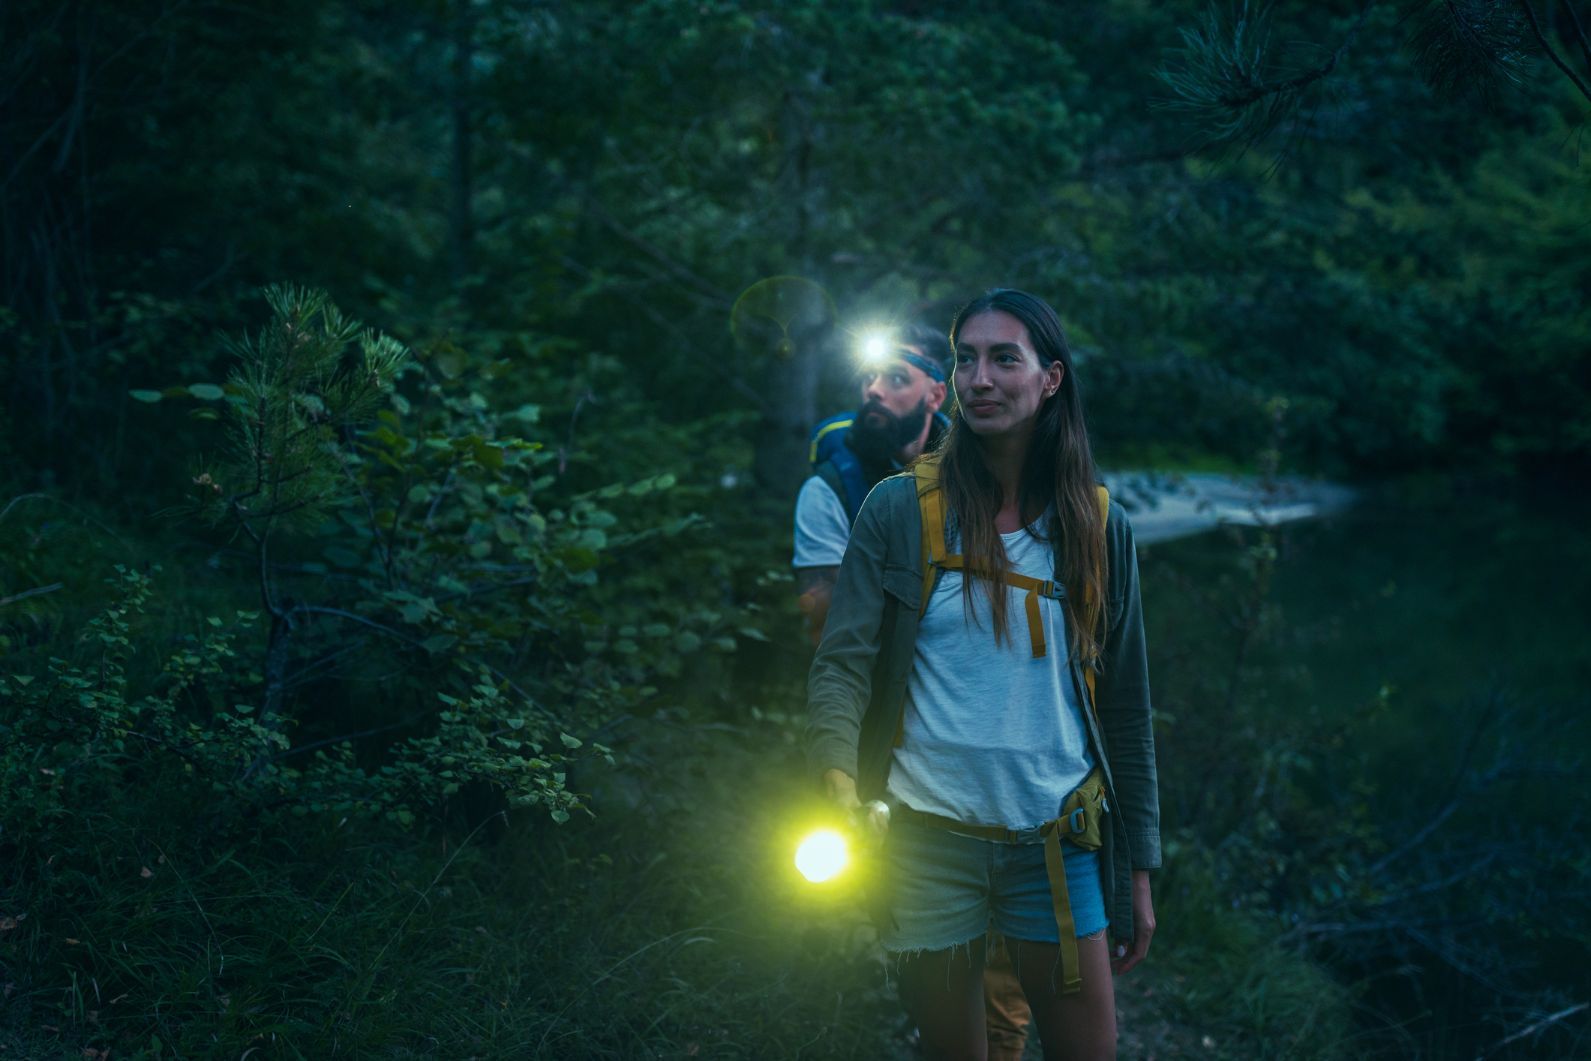 Two hikers at night in the forest, one with a torch and another with a headlamp, looking scared.